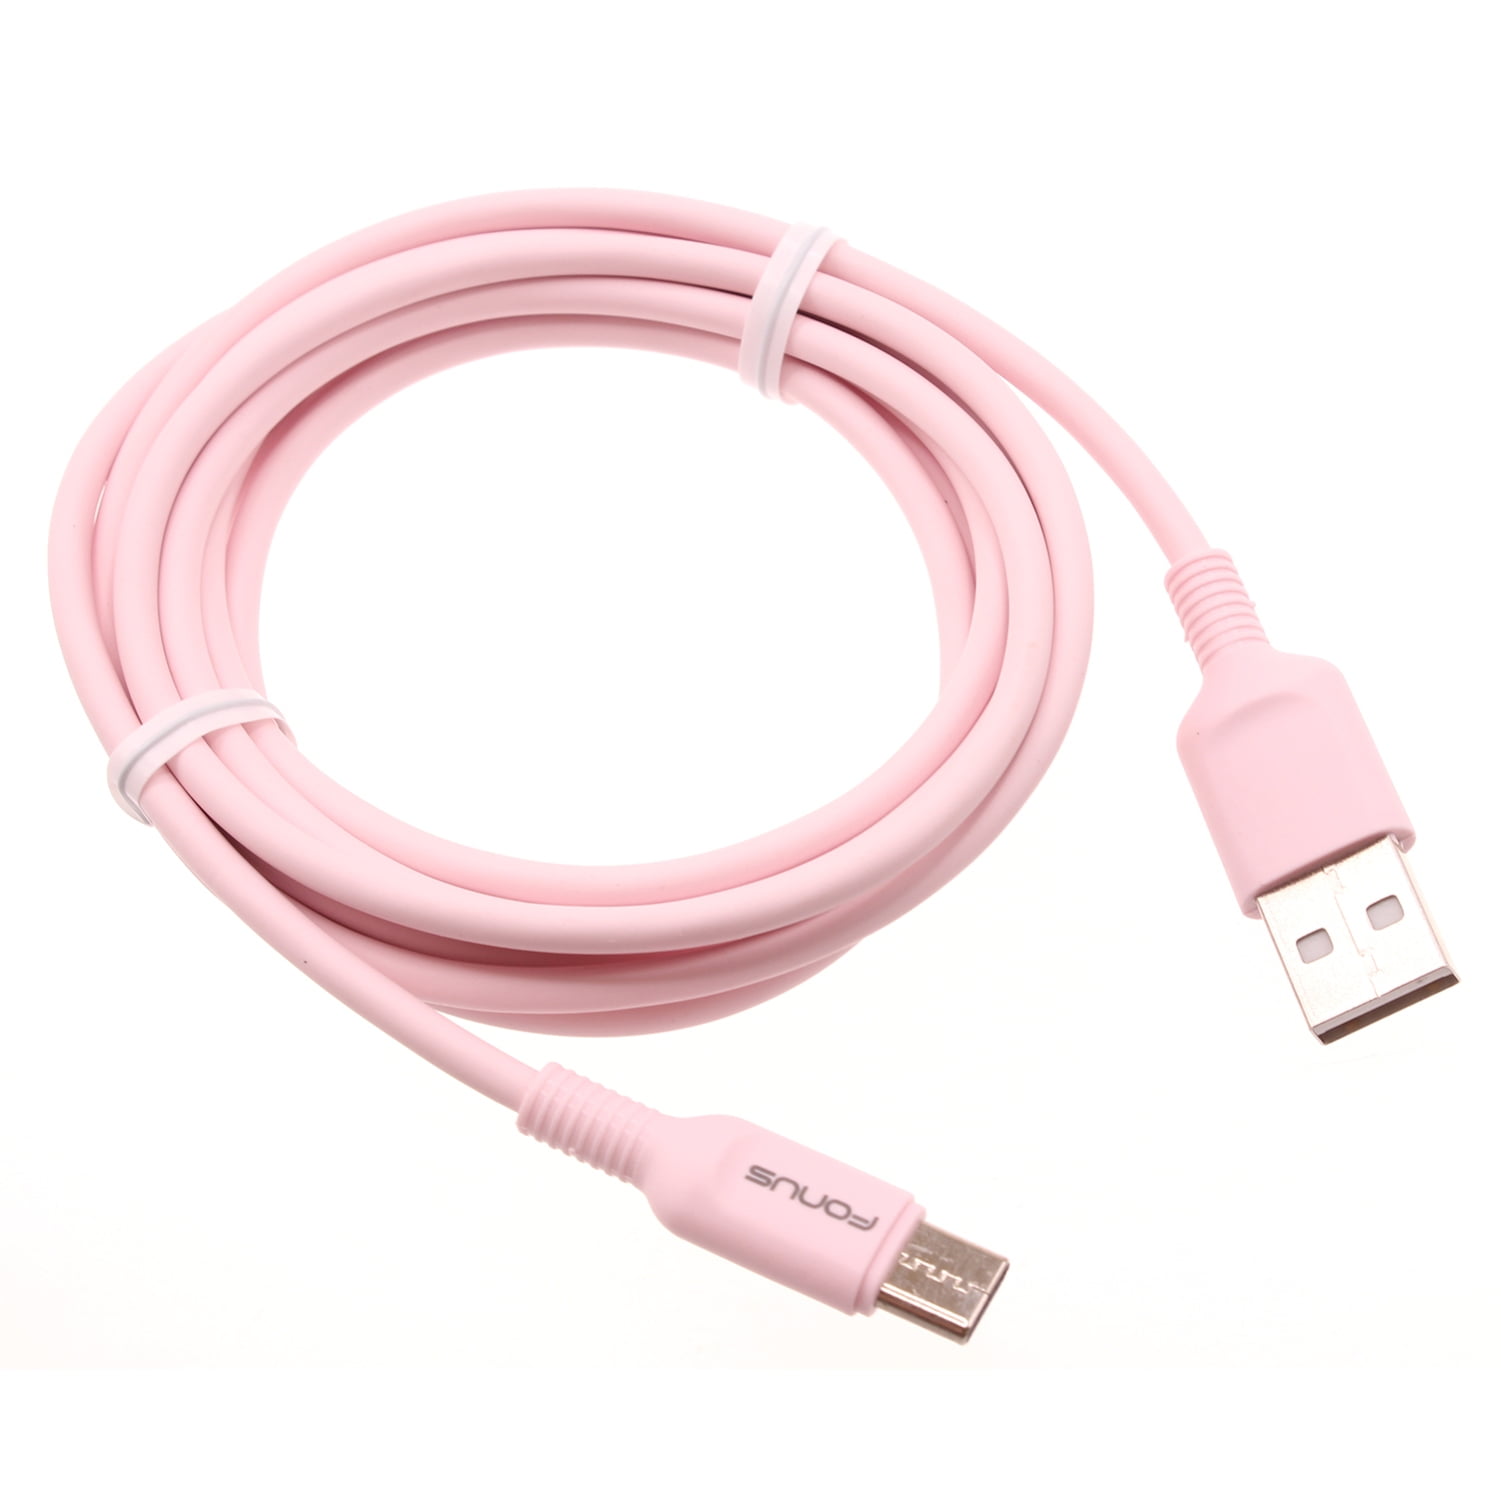 Charger Cord Pink 6ft USB-C Cable for LG Velvet, Wing, K92 5G Phones -  Power Wire Type-C Fast Charge Sync High Speed R5L Compatible With LG  Velvet, Wing, K92 5G Models -